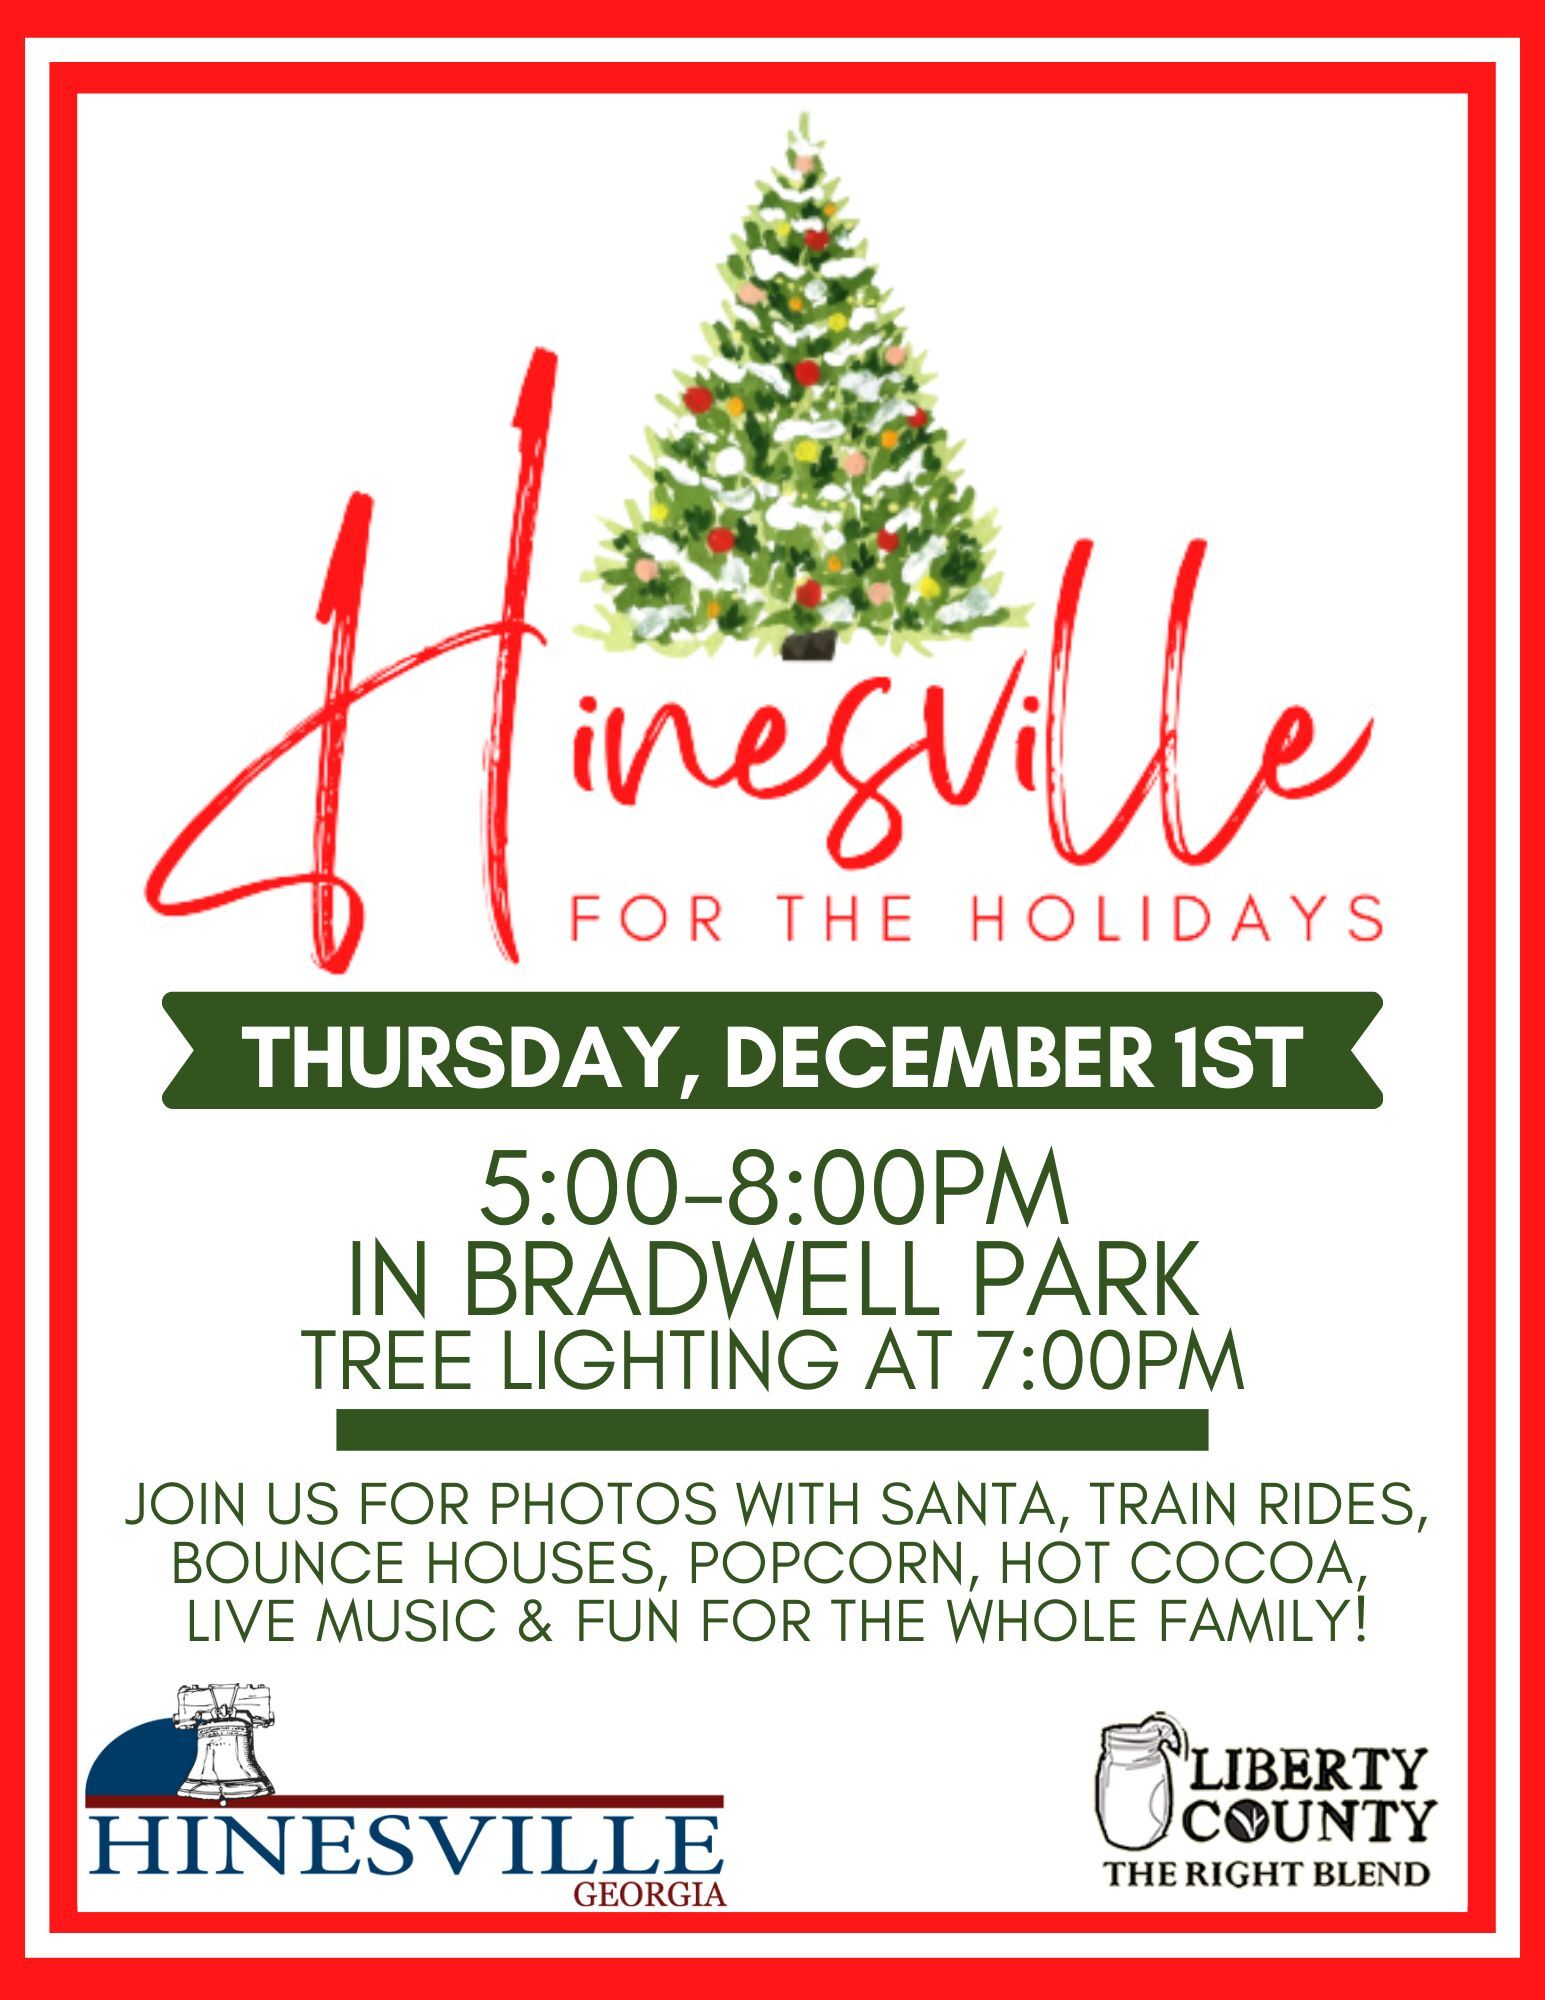 Hinesville for the holidays flyer